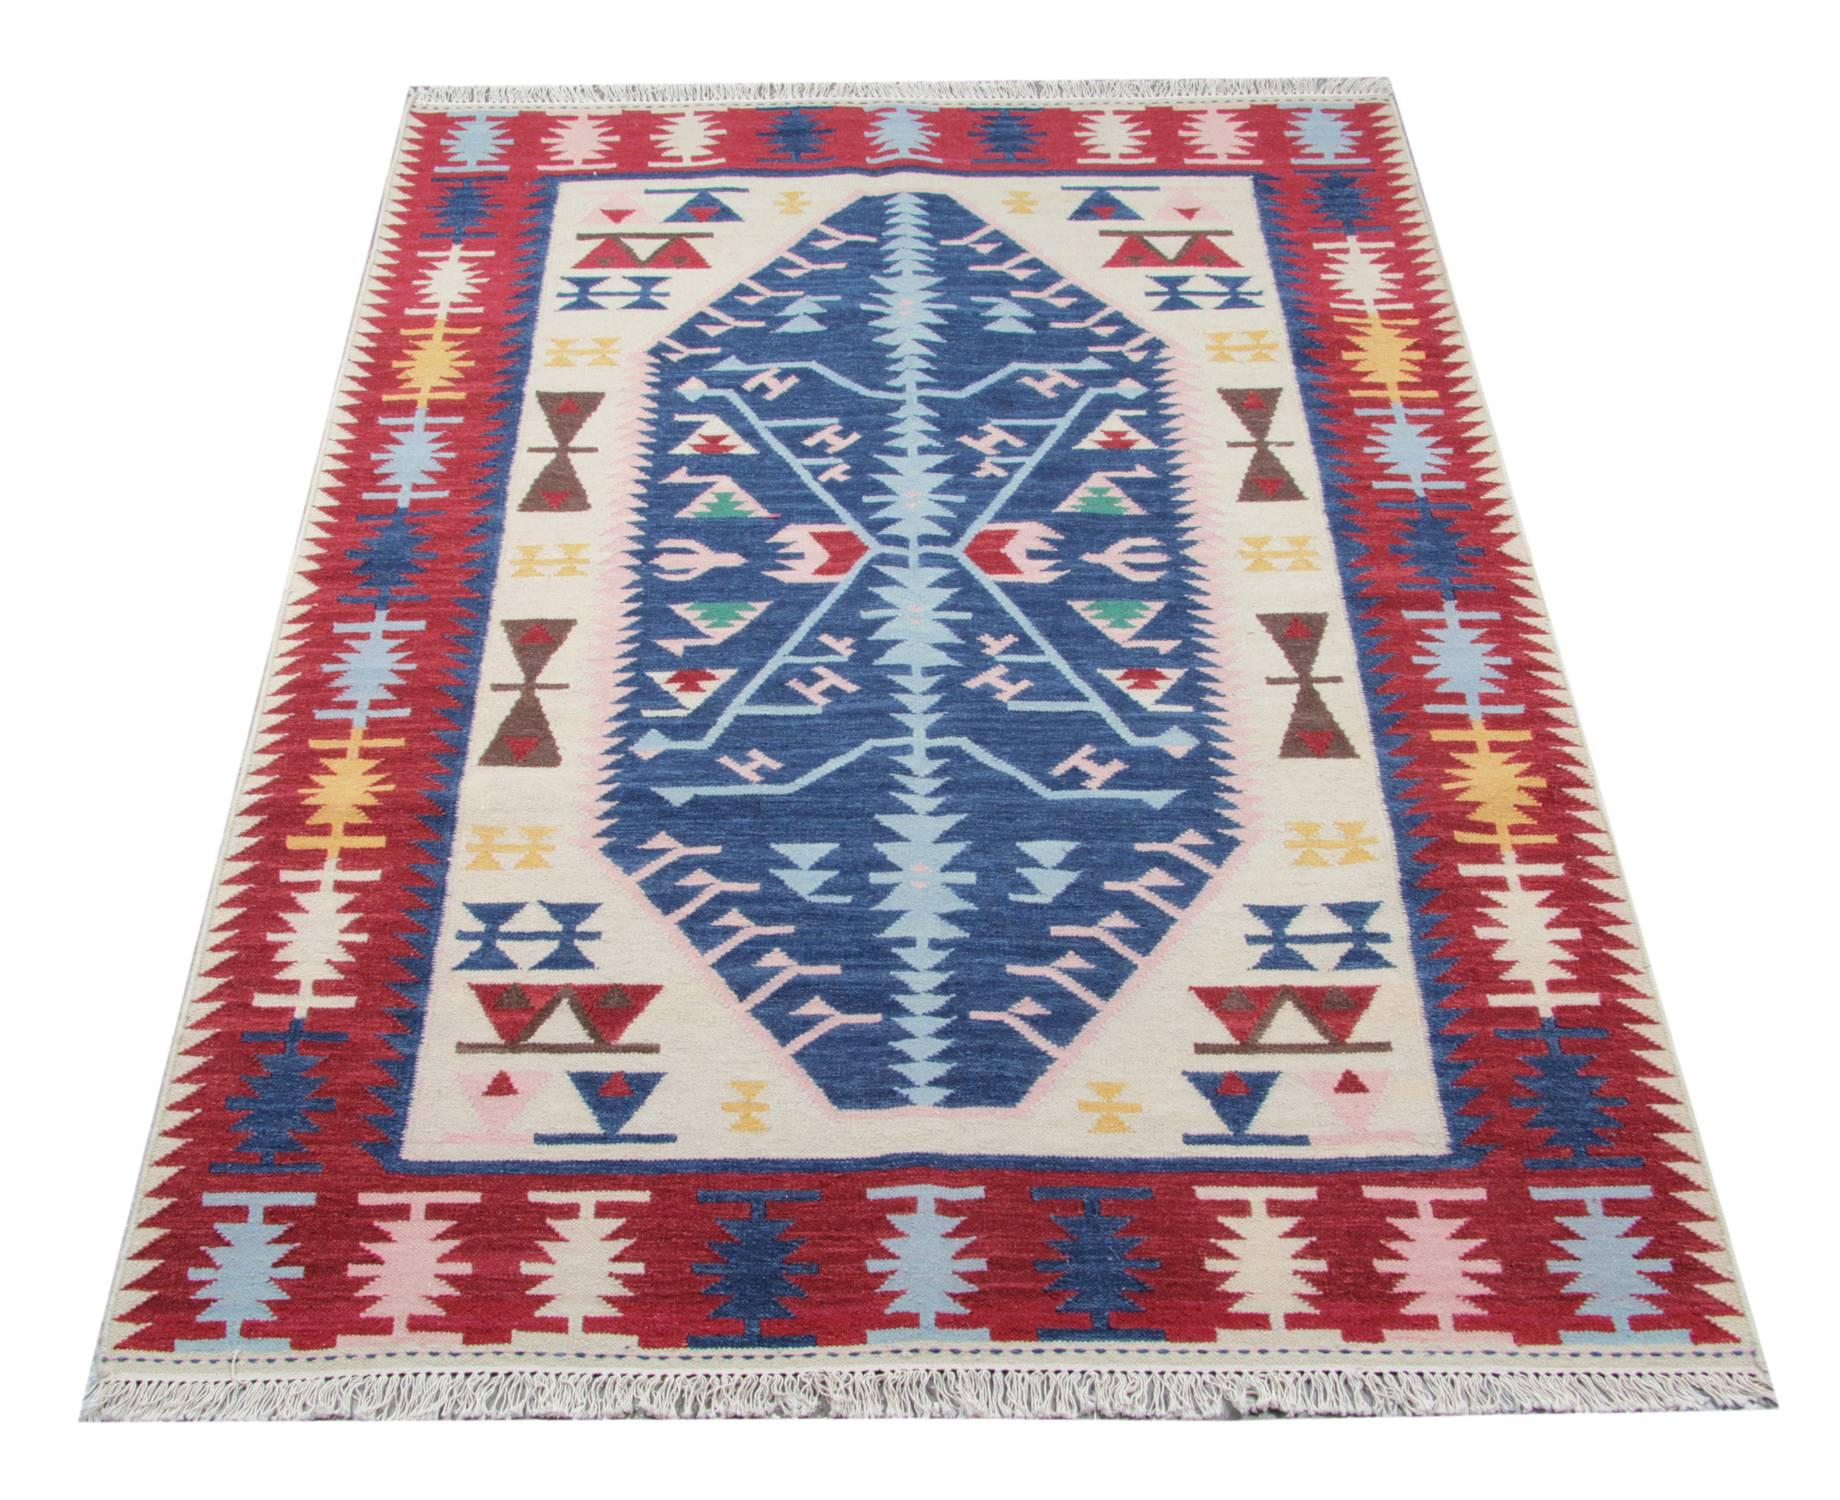 This handmade carpet blue rug is a flat-weave rug woven in stylish colours. On this tribal oriental rug, we can see light blue, dark blue, white, red and yellow colours. The geometric rug has an elegant red border with same shaped patterns in